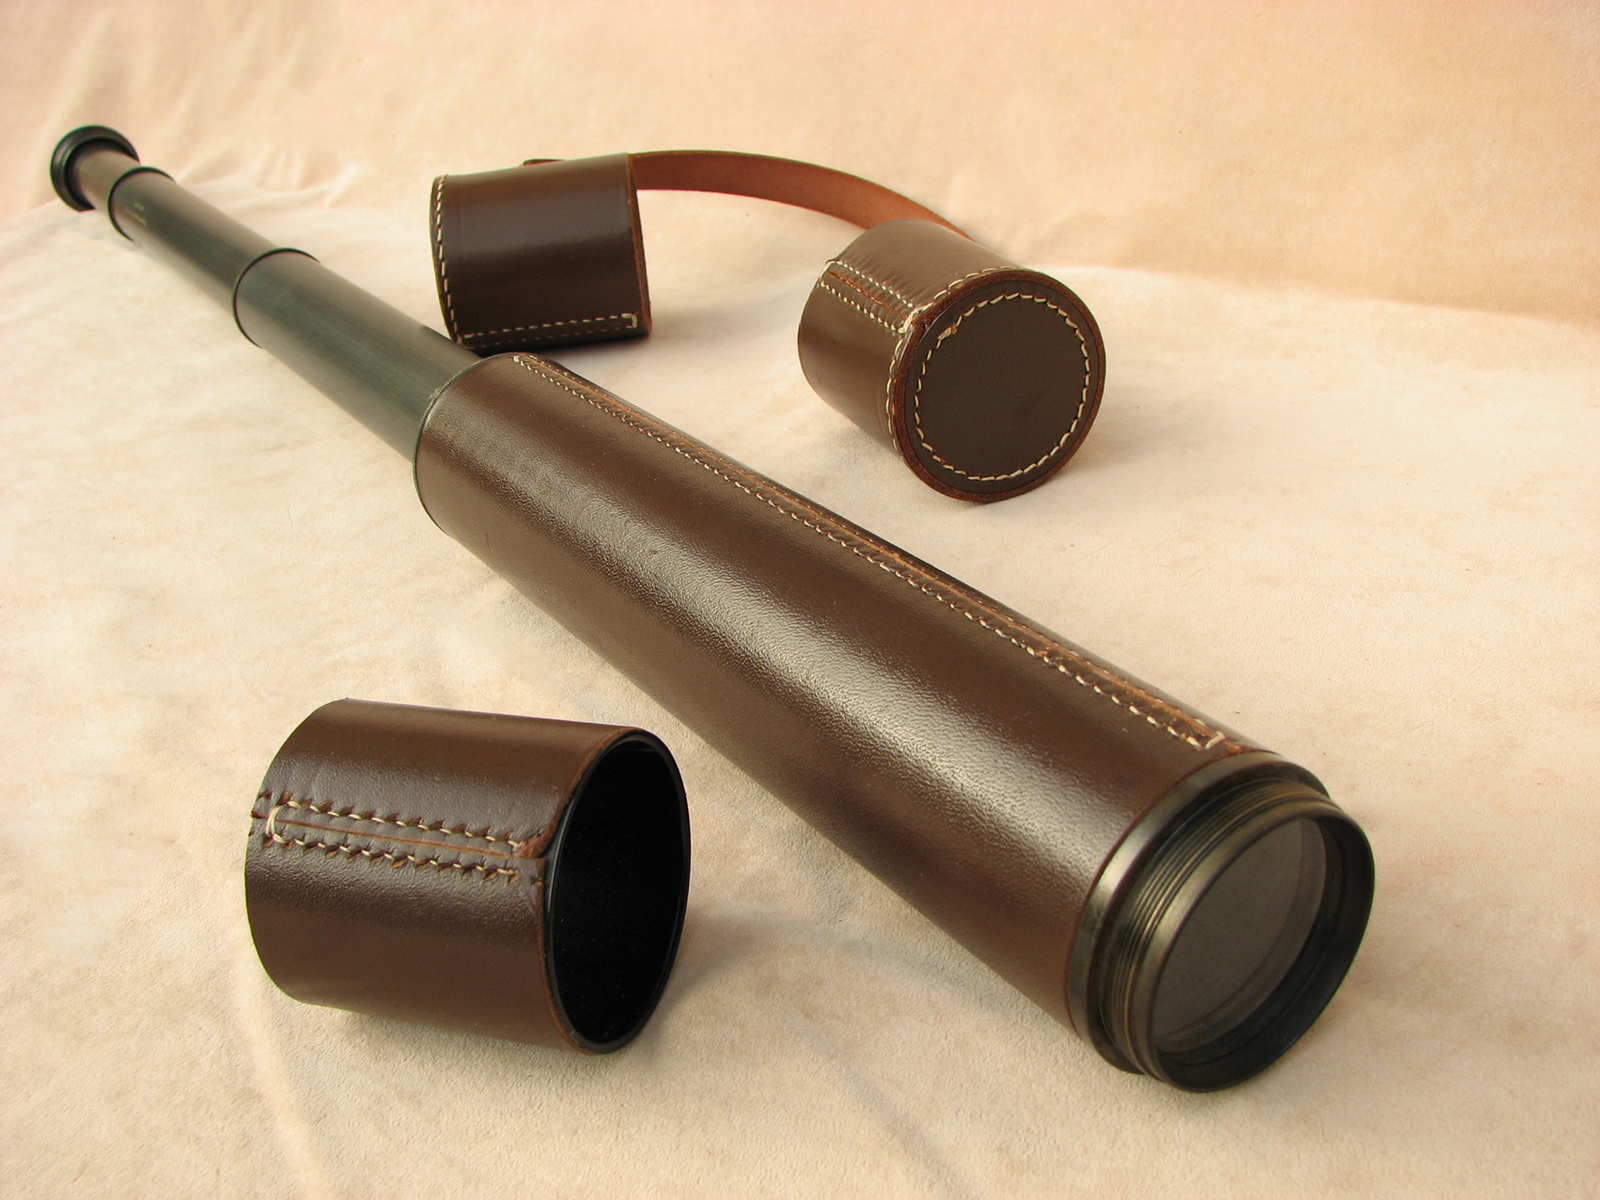 Powerful 55x magnification field telescope by Charles Frank, Glasgow.